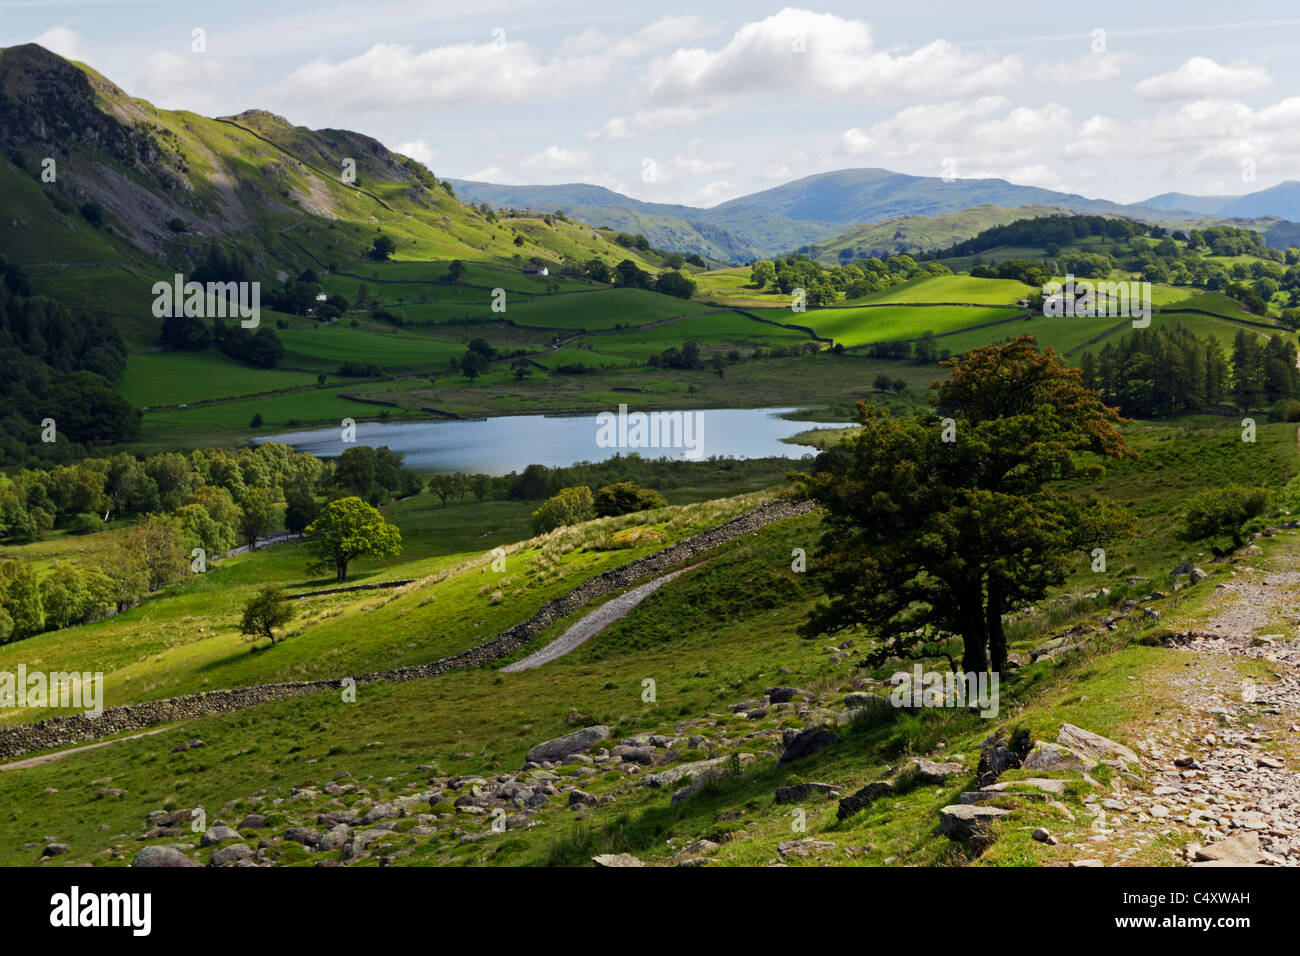 Little Langdale Tarn near Coniston in the Lake District National Park, Cumbria, England, UK. Stock Photo